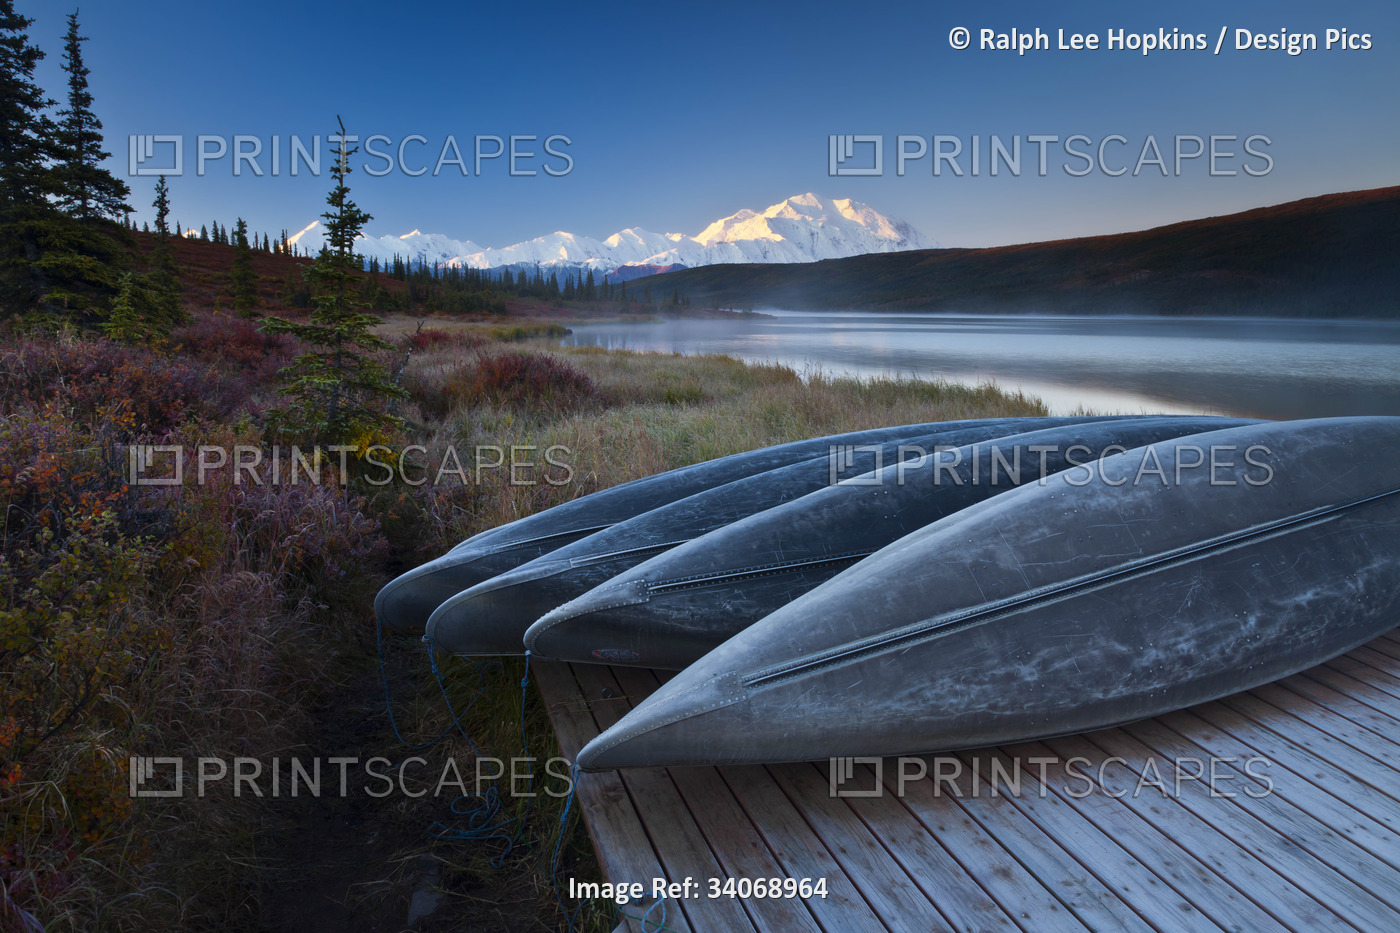 Canoes lined up on a dock at Wonder Lake in front of Mt. McKinley.